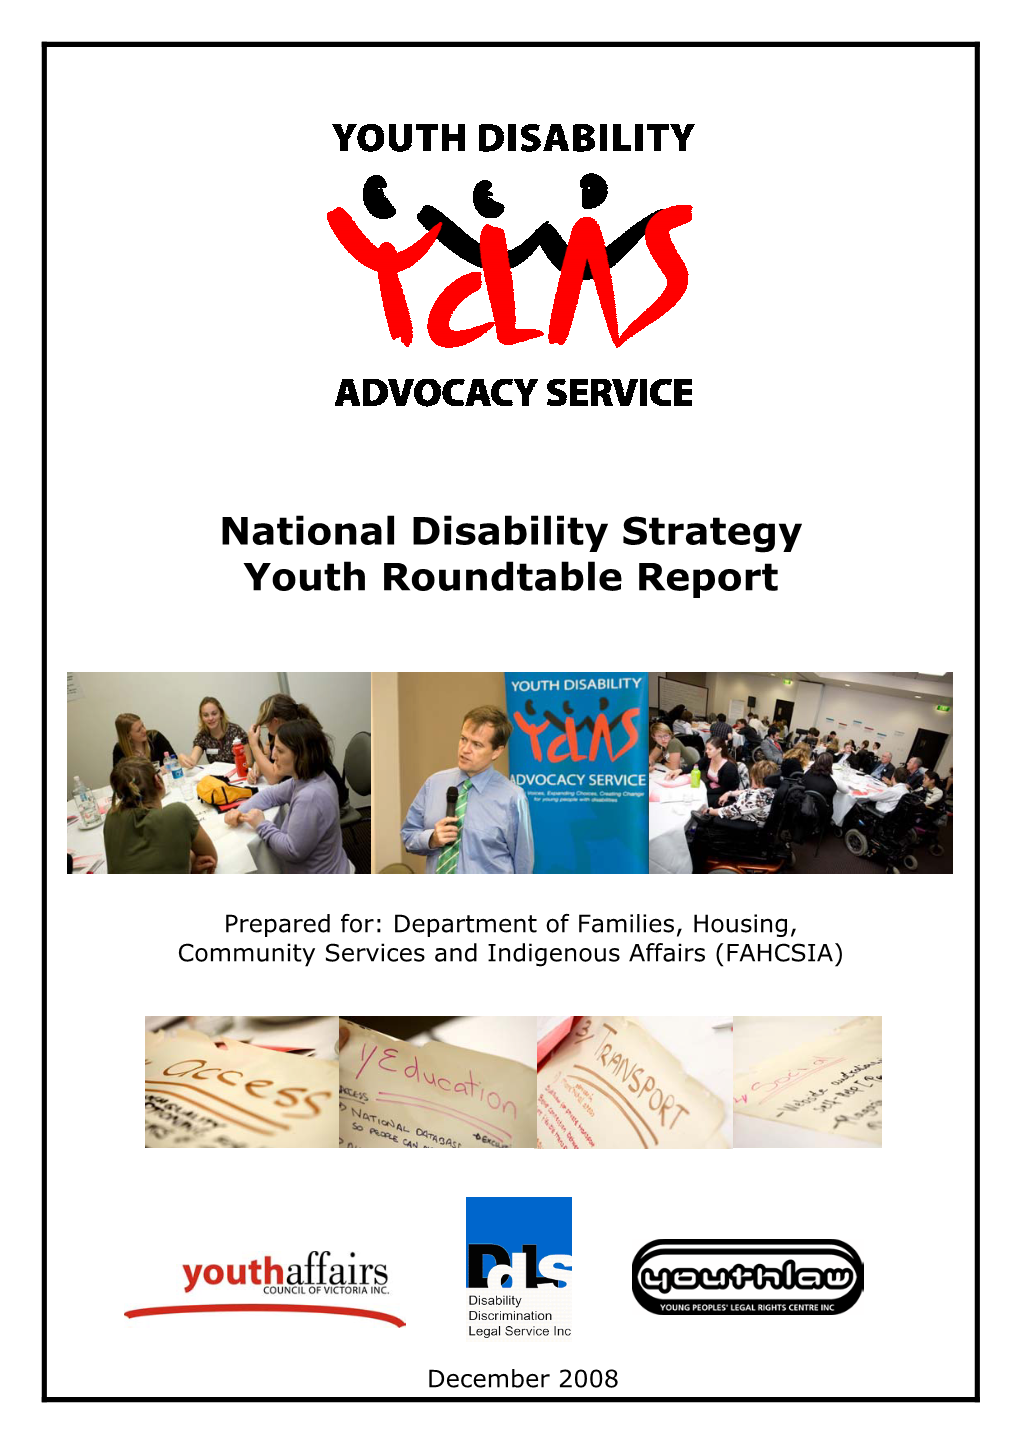 National Disability Strategy Youth Roundtable Report